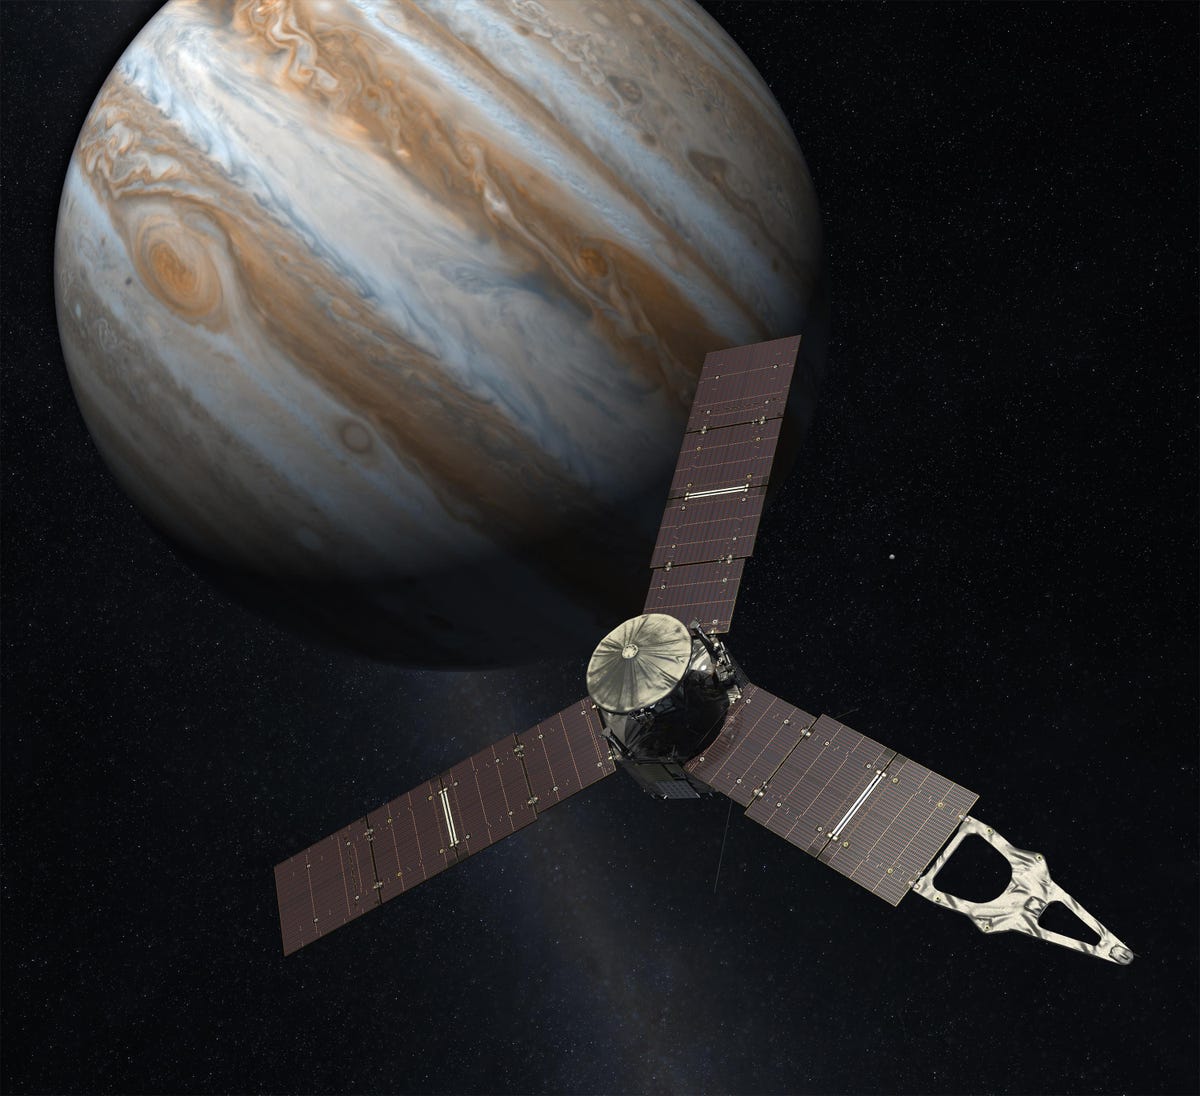 The Juno spacecraft with the planet Uranus in the background